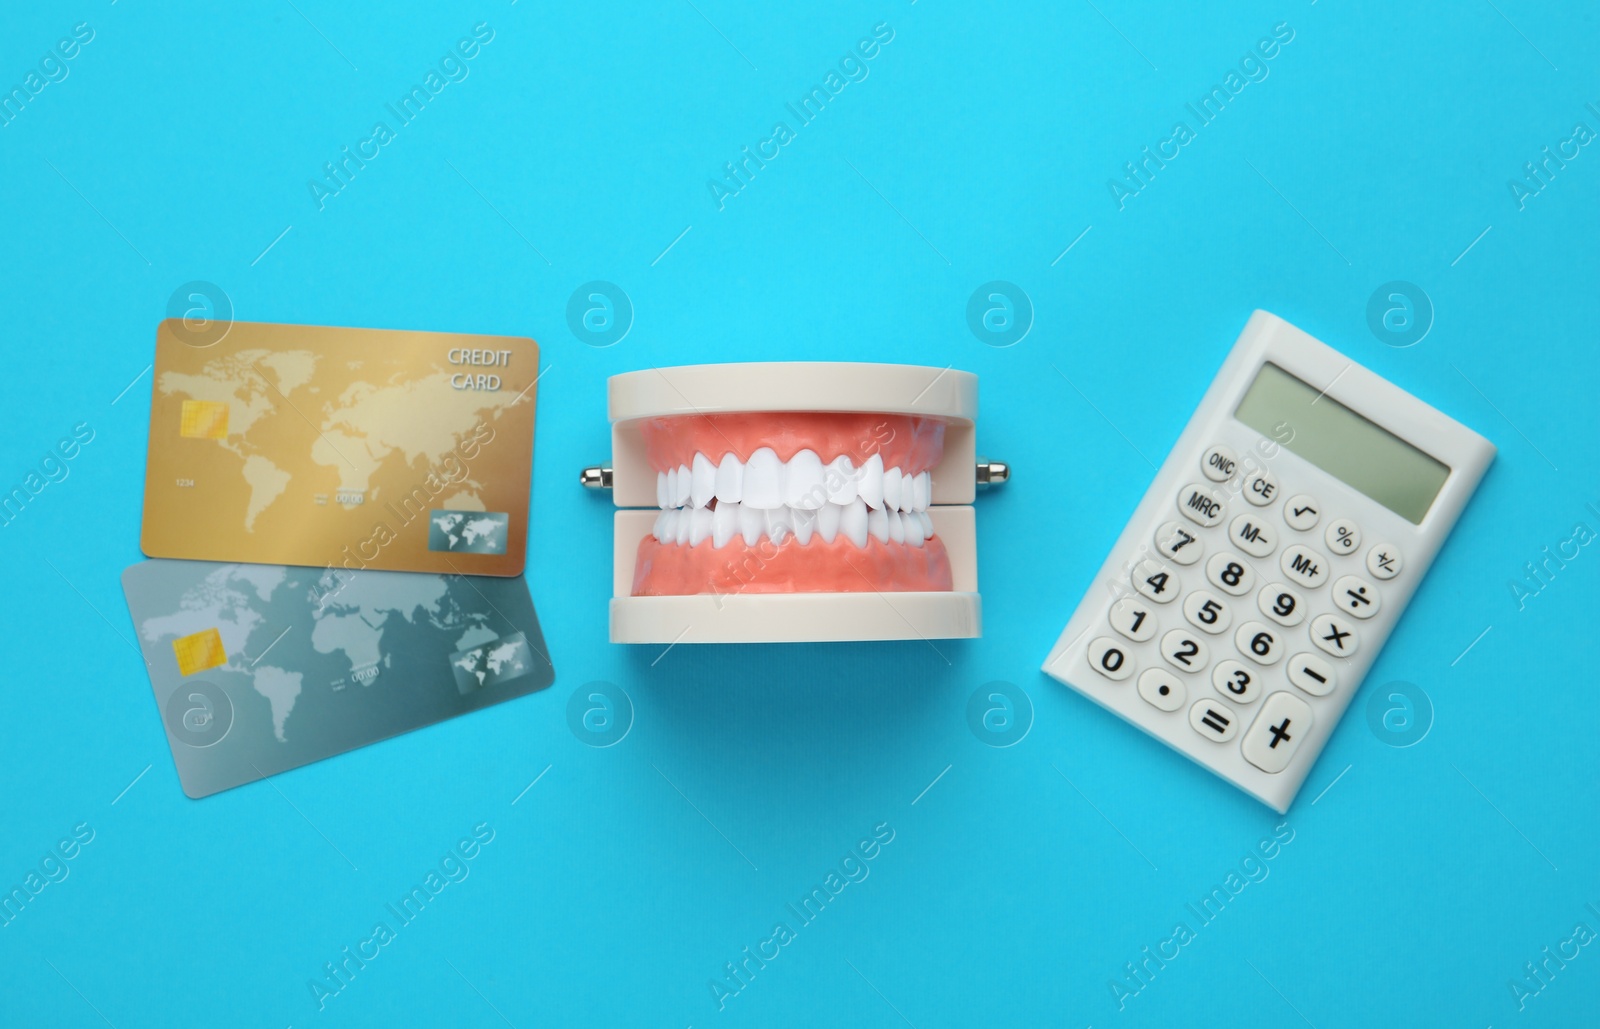 Photo of Educational dental typodont model, credit cards and calculator on light blue background, flat lay. Expensive treatment